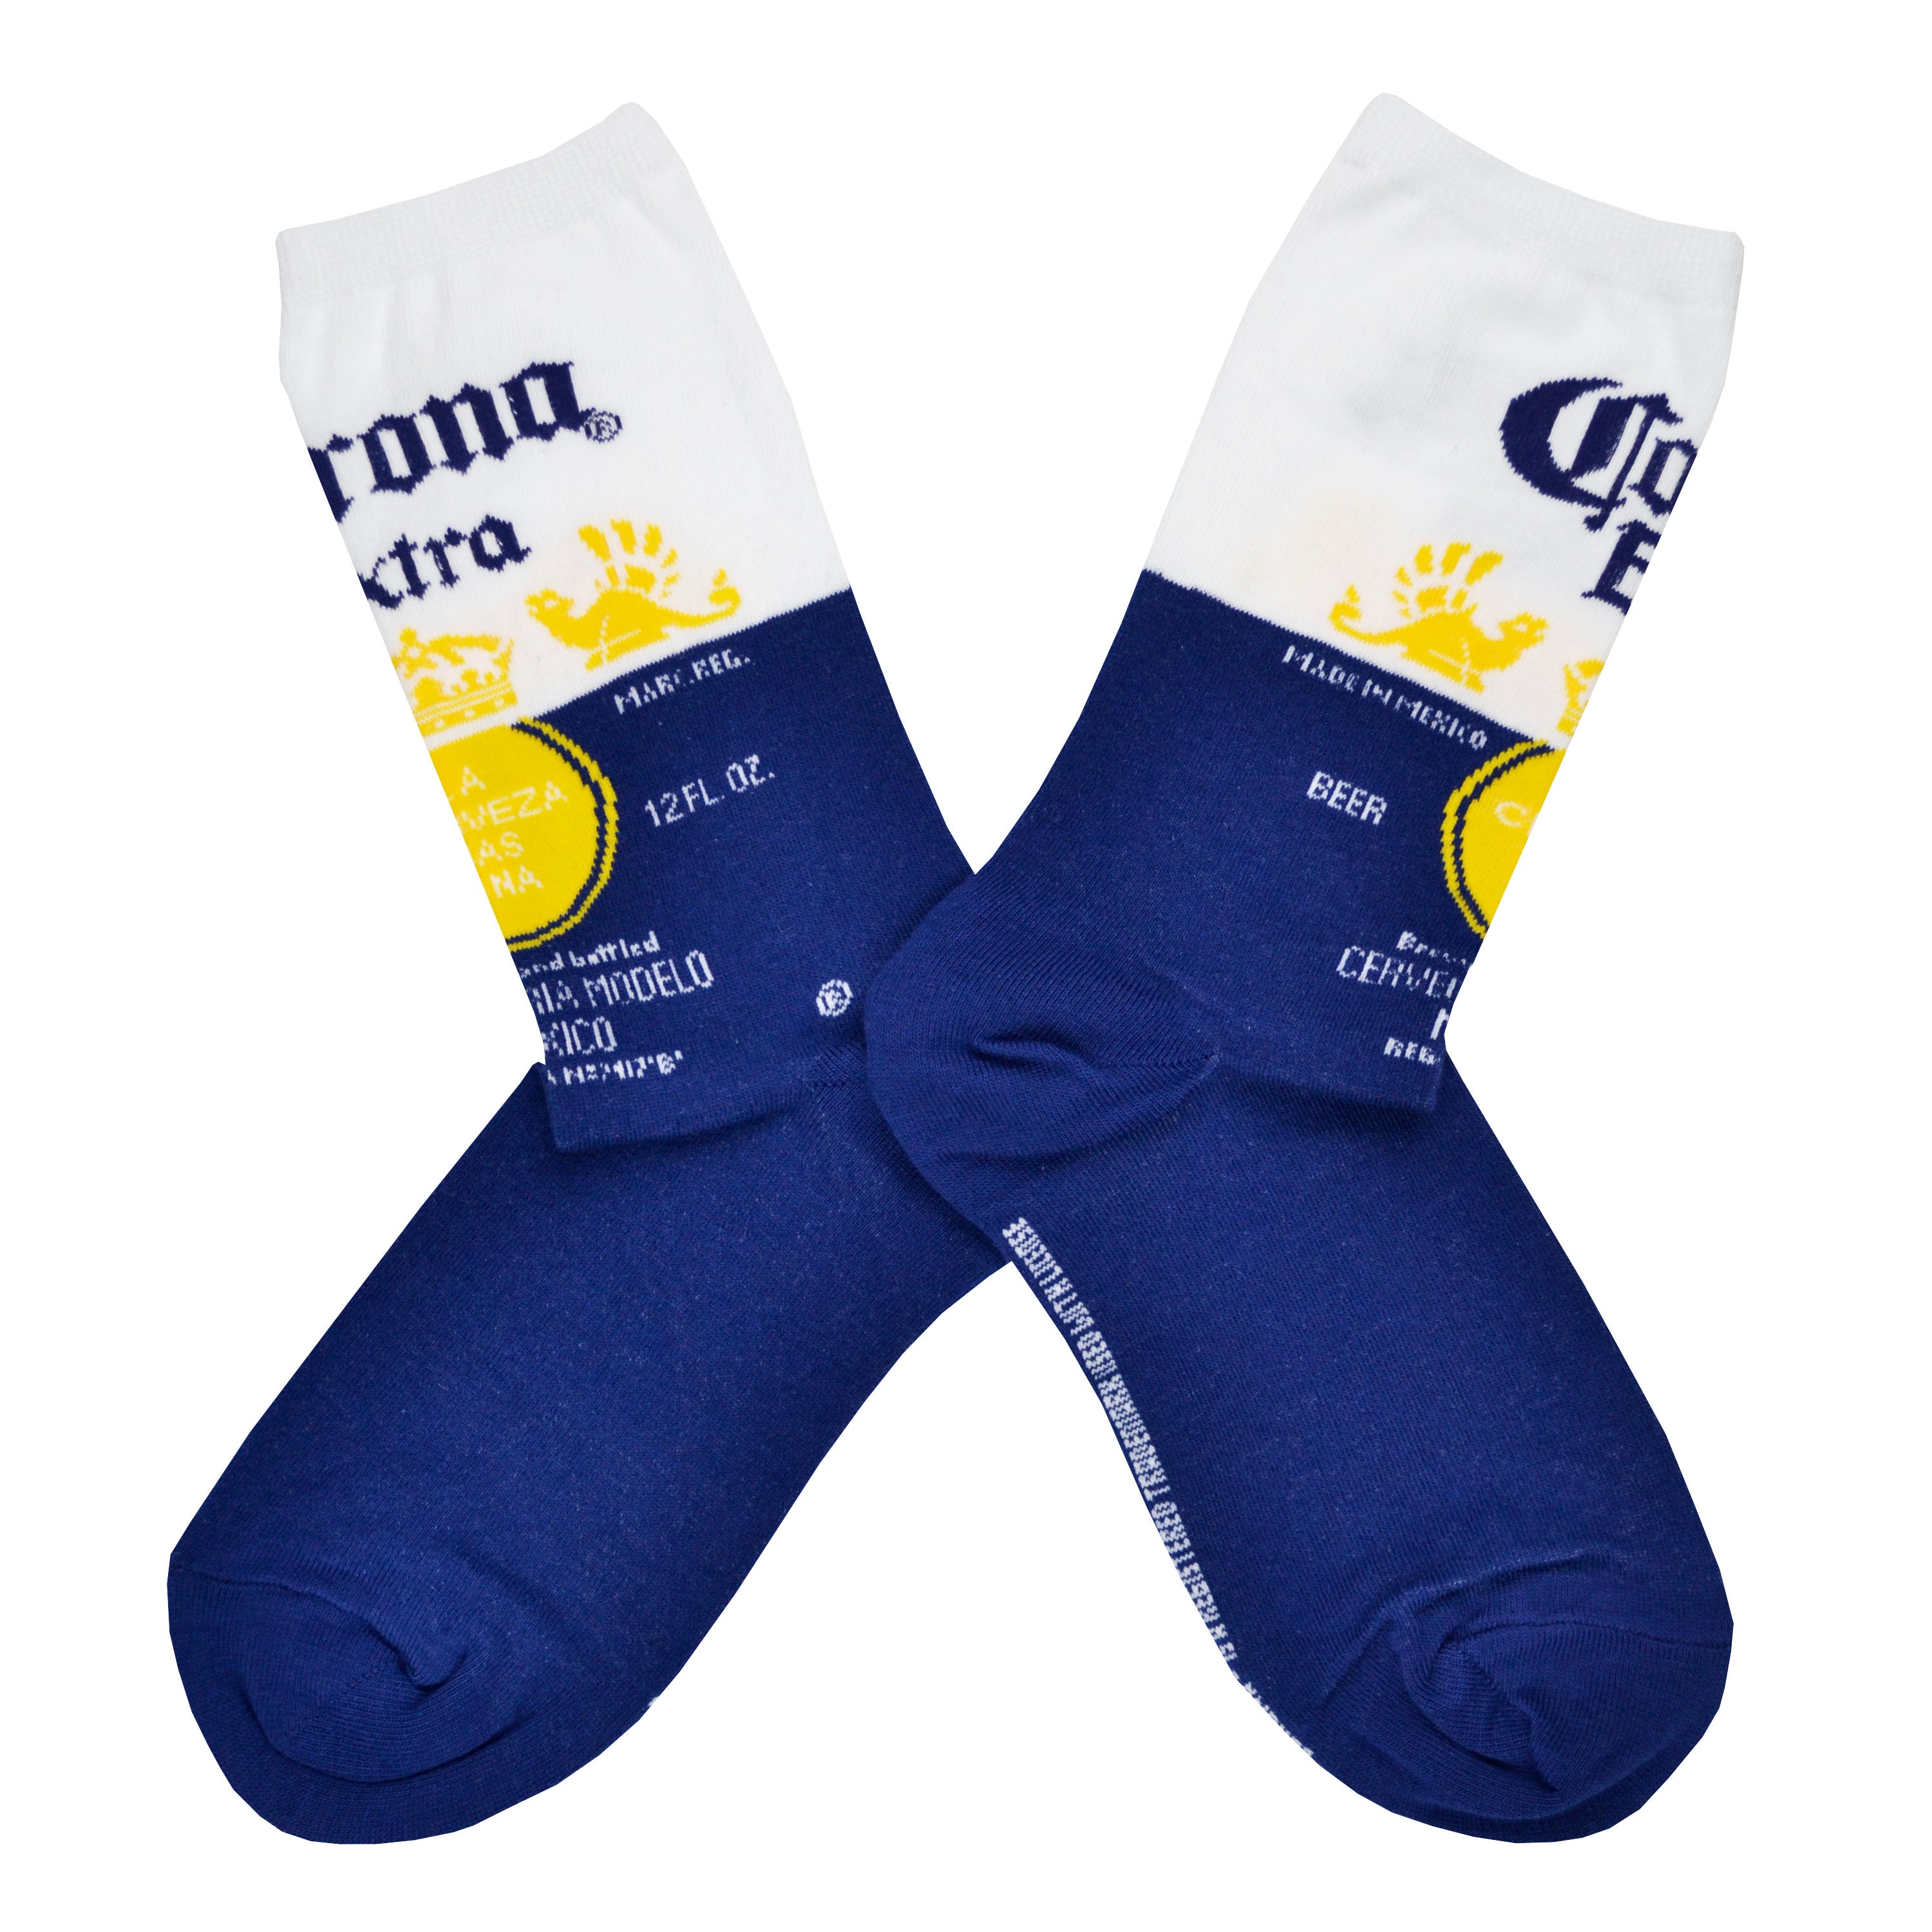 Shown in a flatlay, a pair of Sock Smith brand women's cotton crew socks in blue and white featuring the Corona Extra label on the leg.